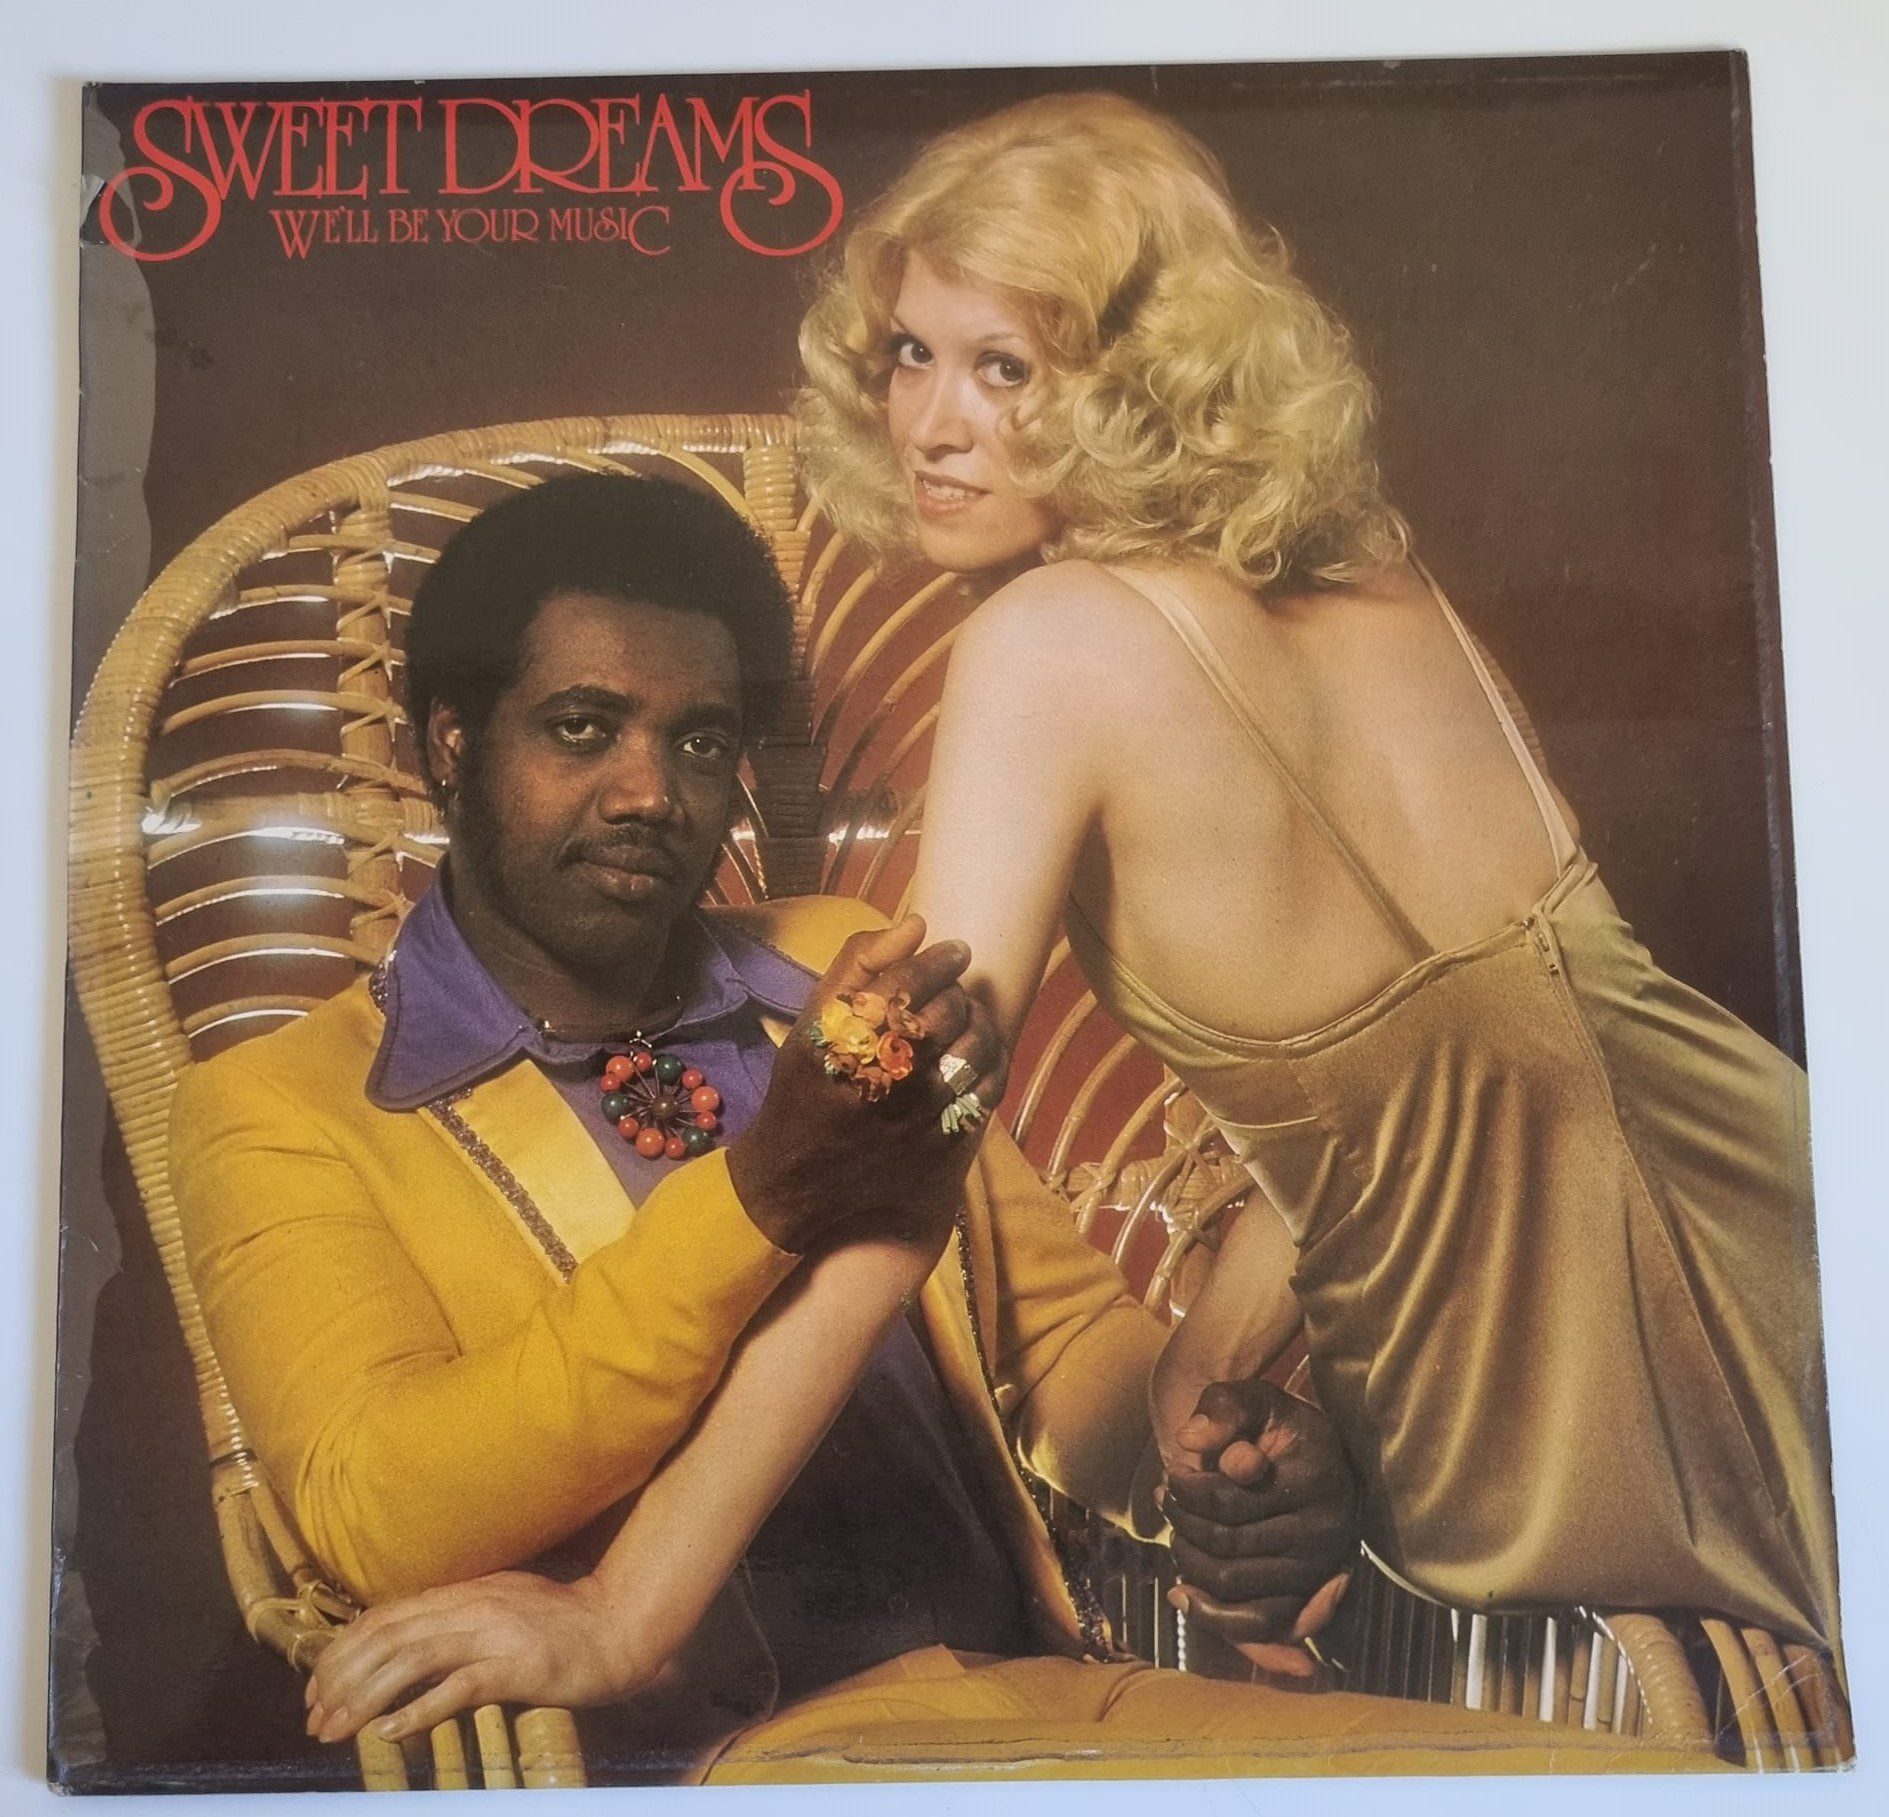 Buy this rare Sweet Dreams record by clicking here